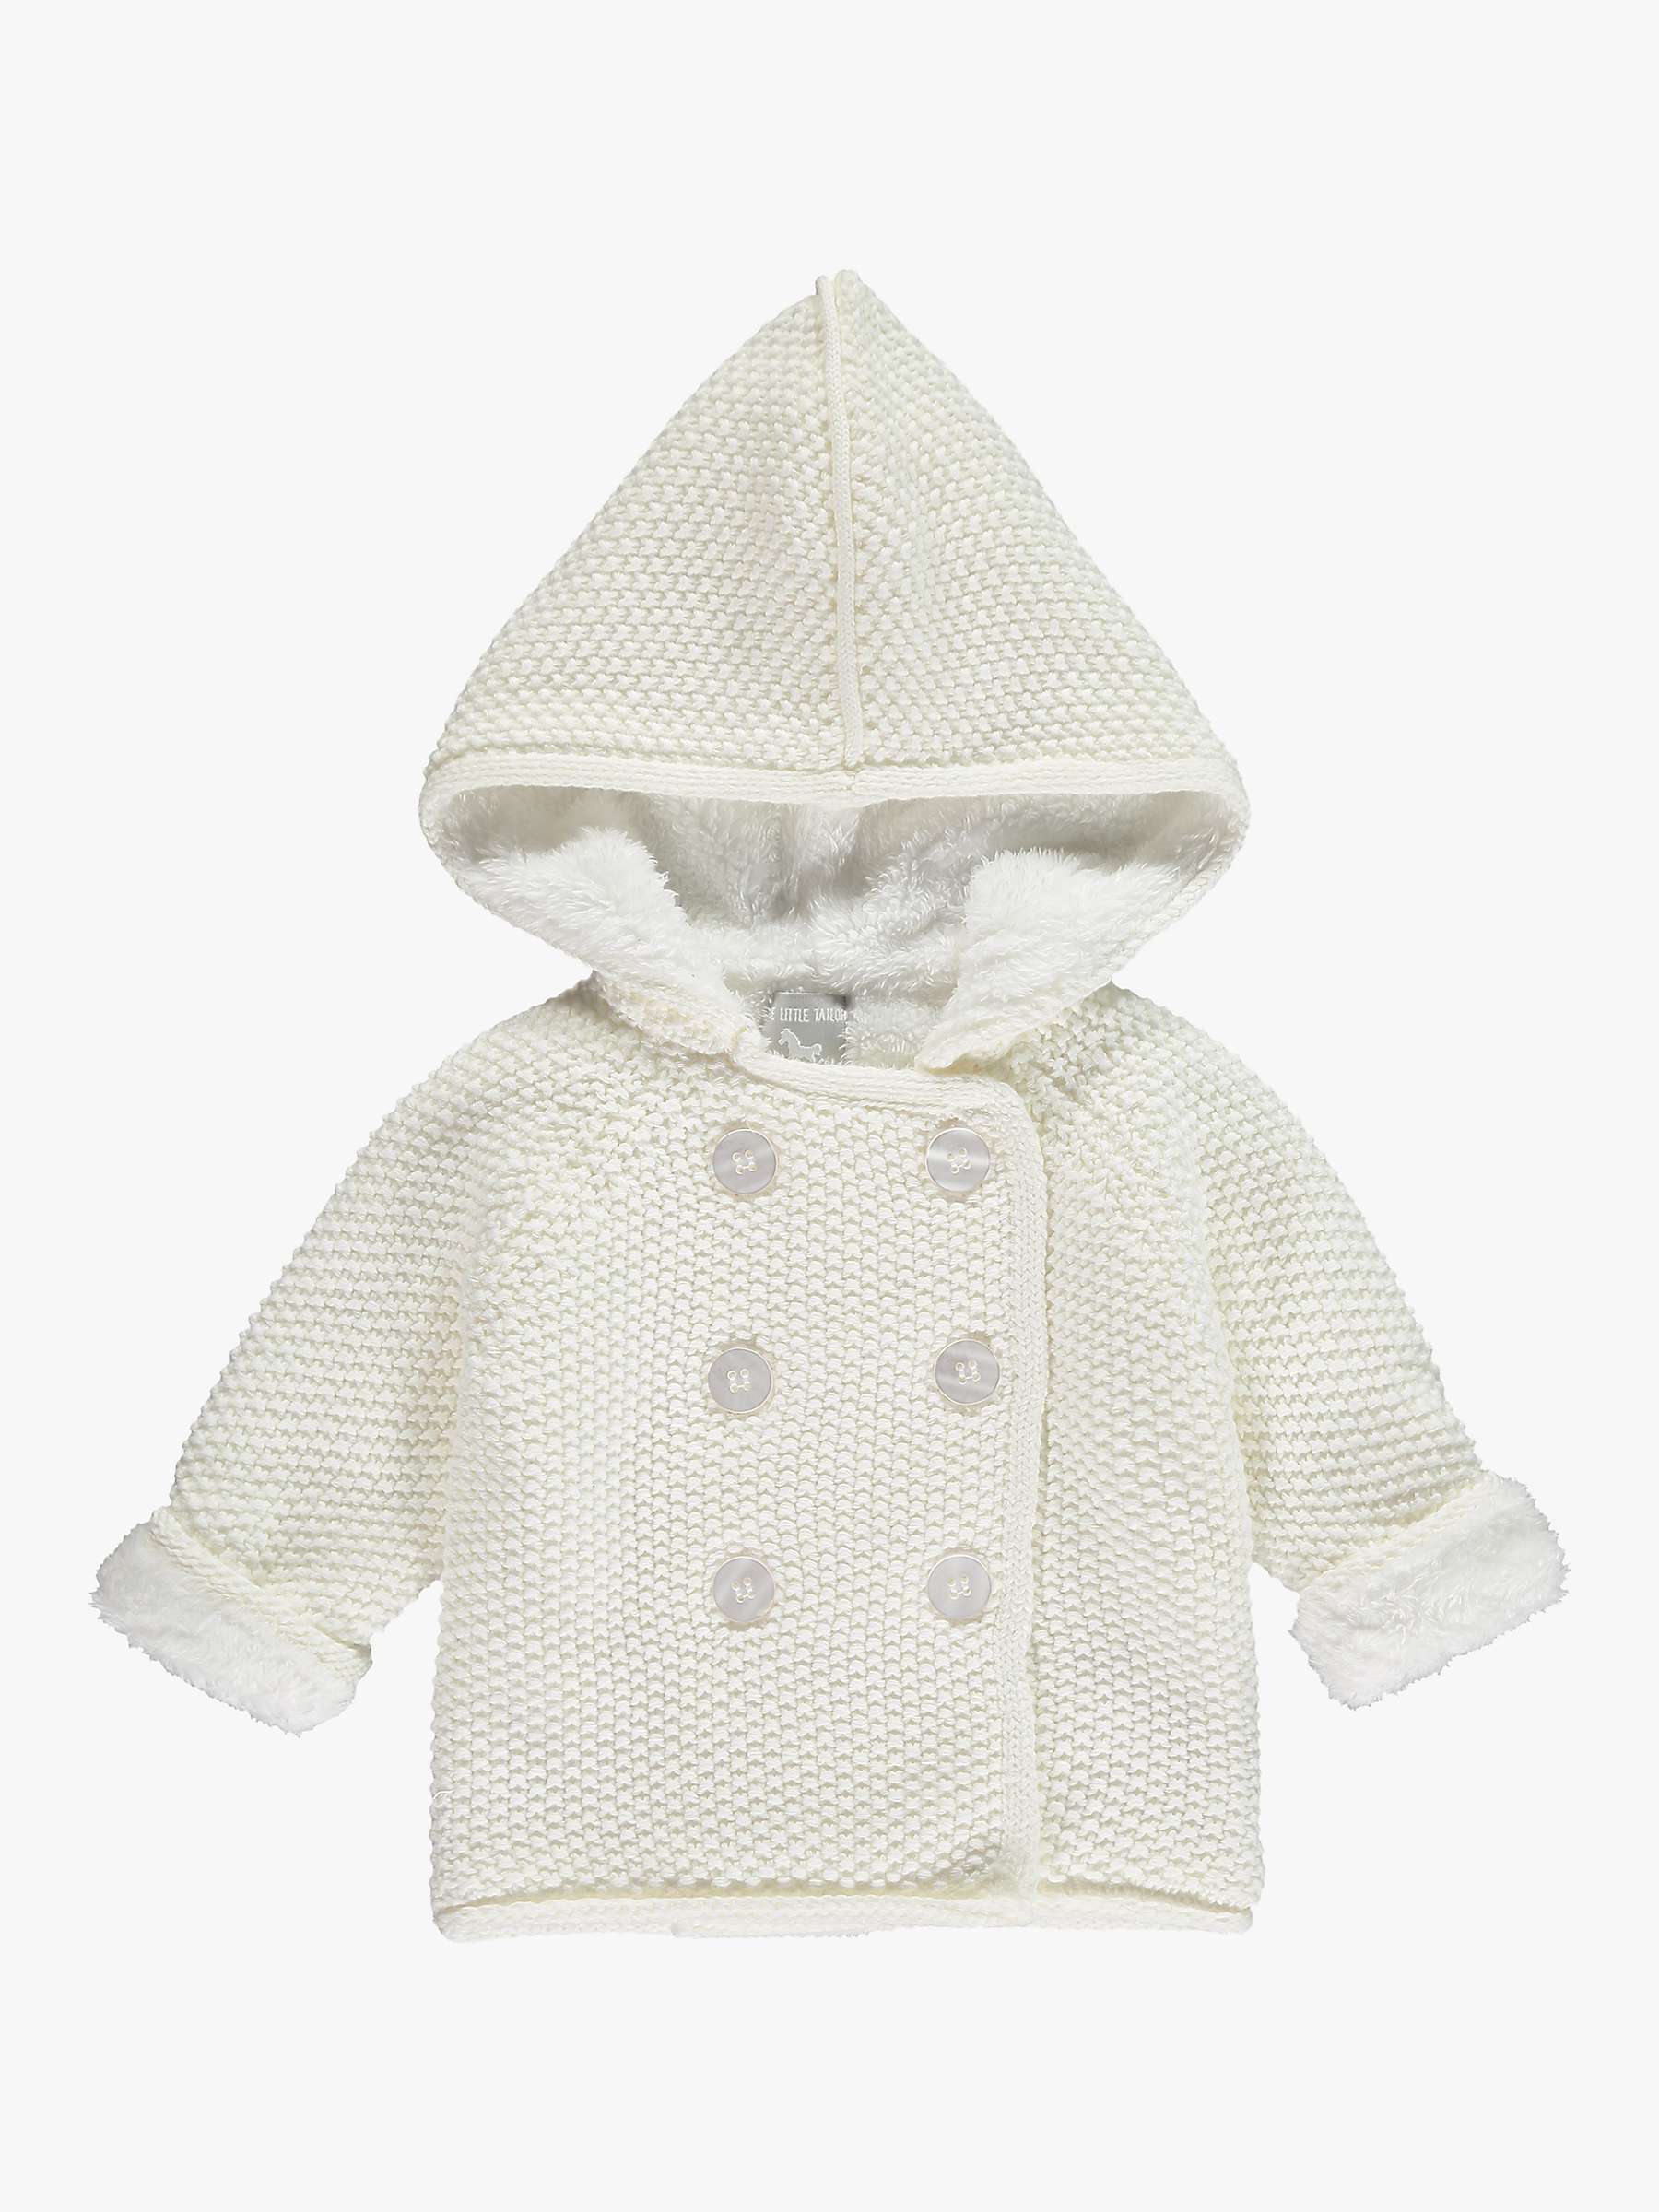 Buy The Little Tailor Baby Plush Lined Knitted Pram Jacket Online at johnlewis.com